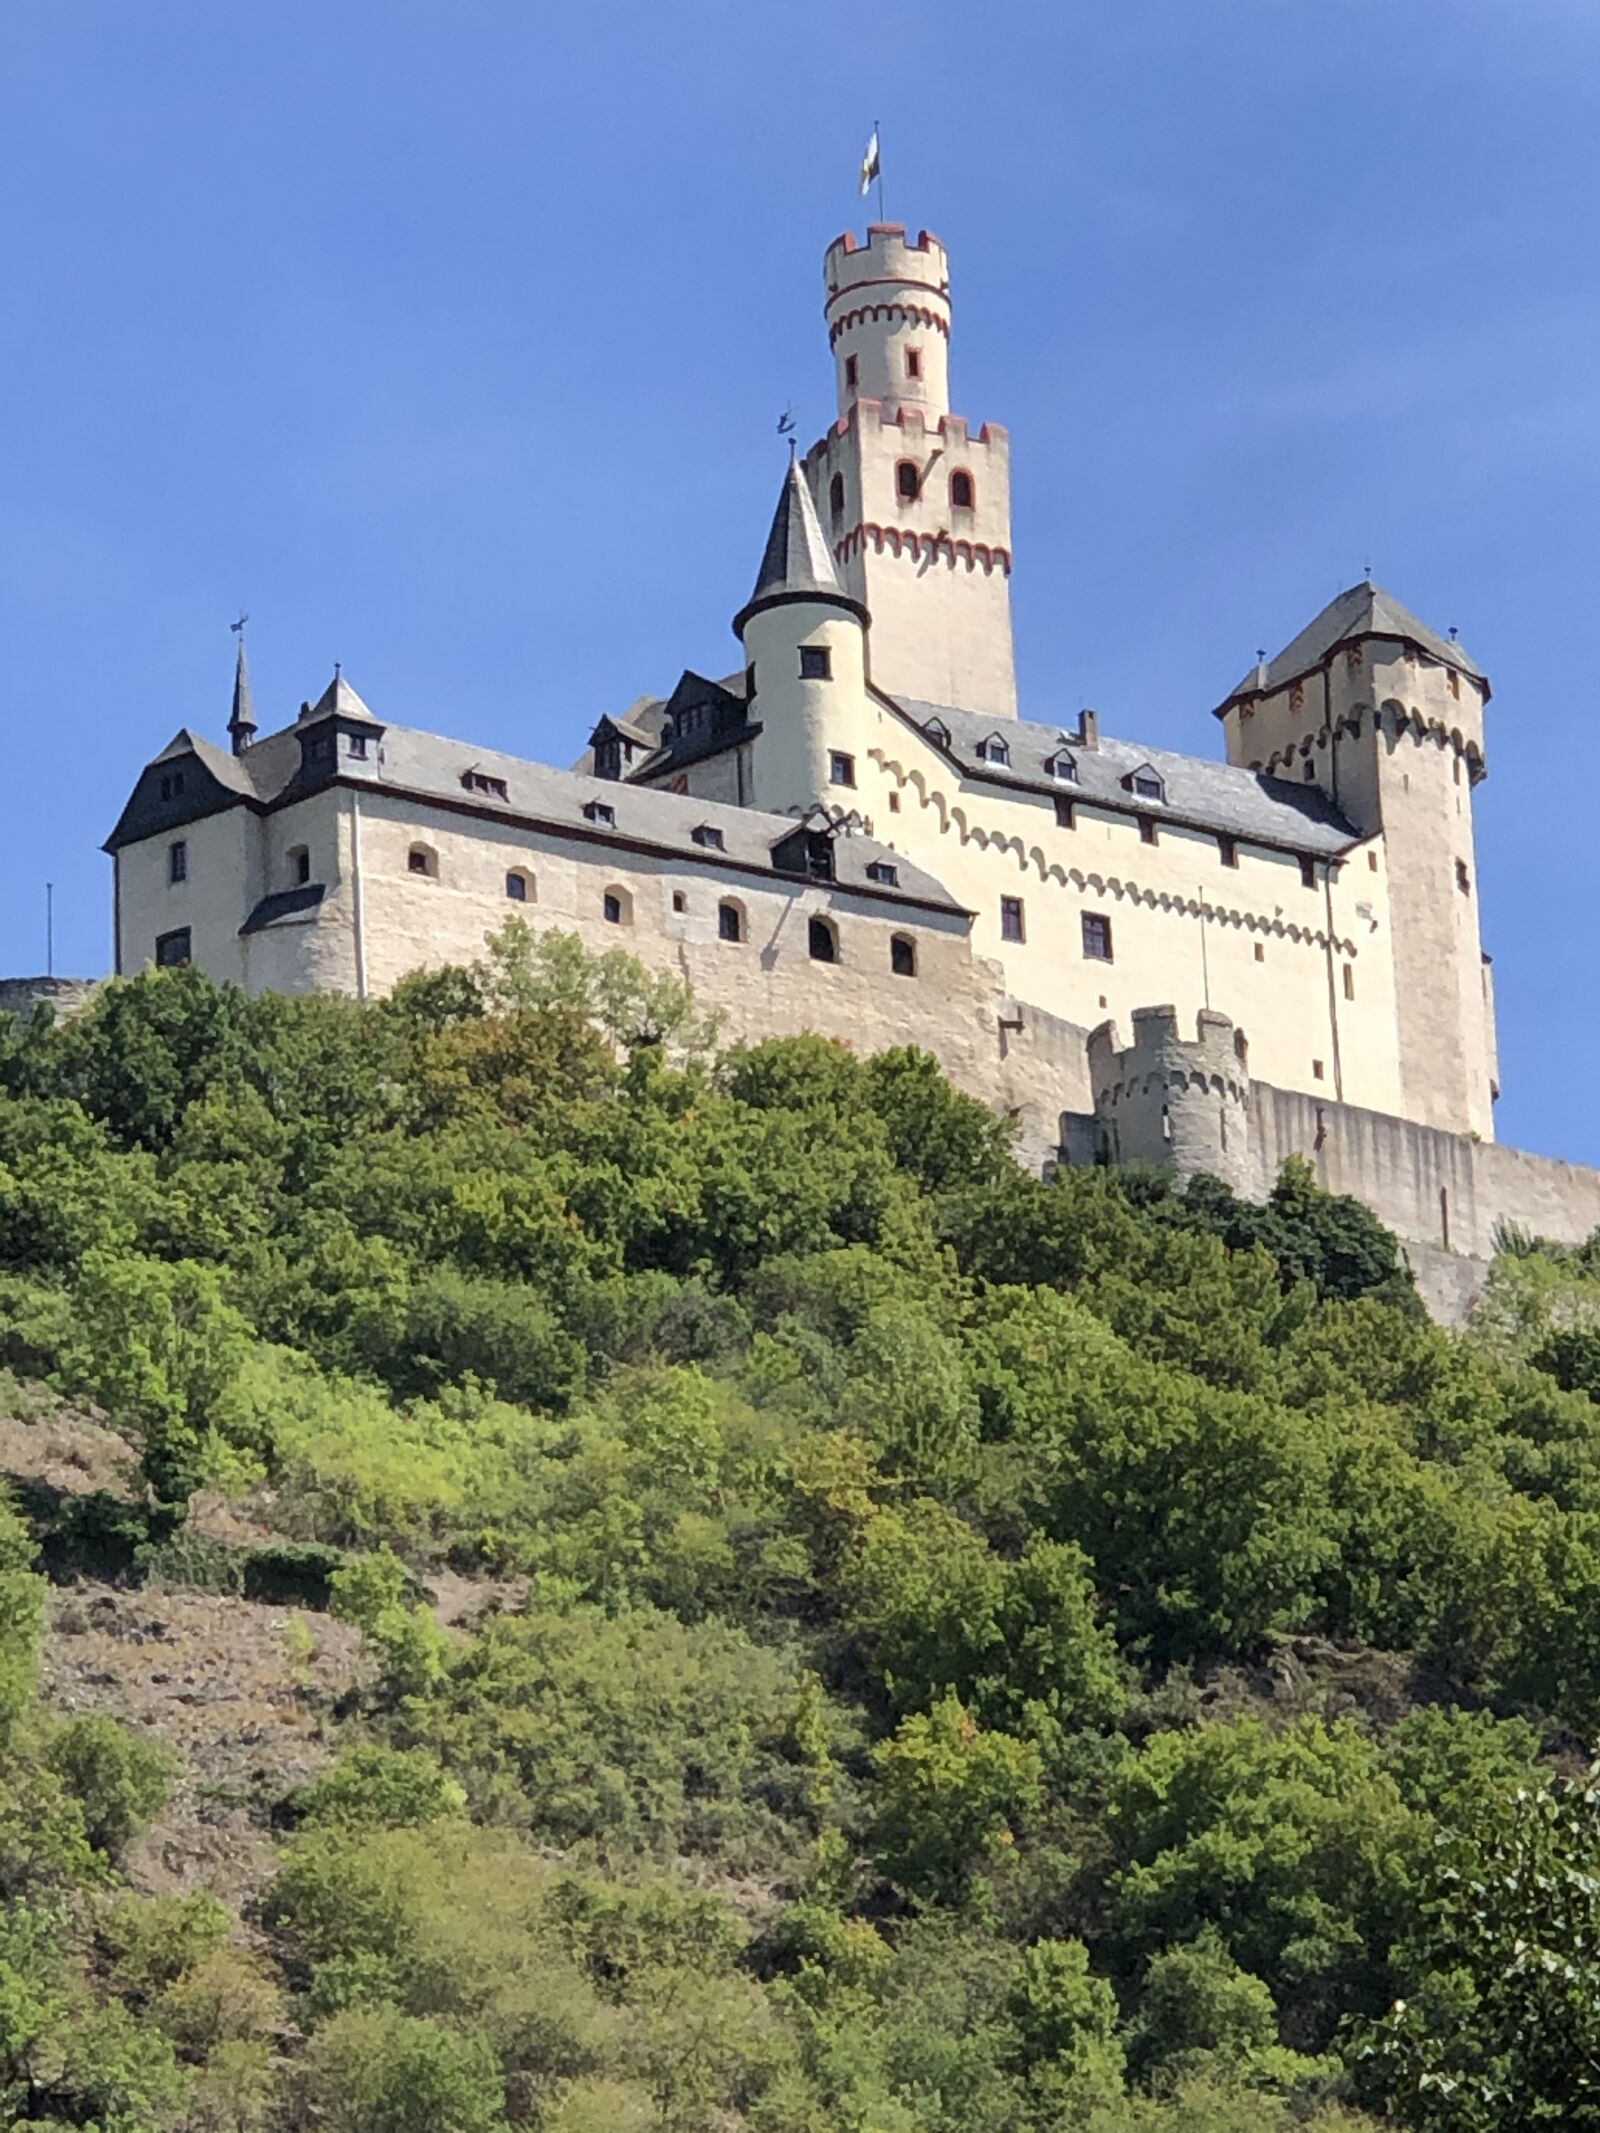 Apple iPhone X sample photo. Castle, romantic, middle ages photography